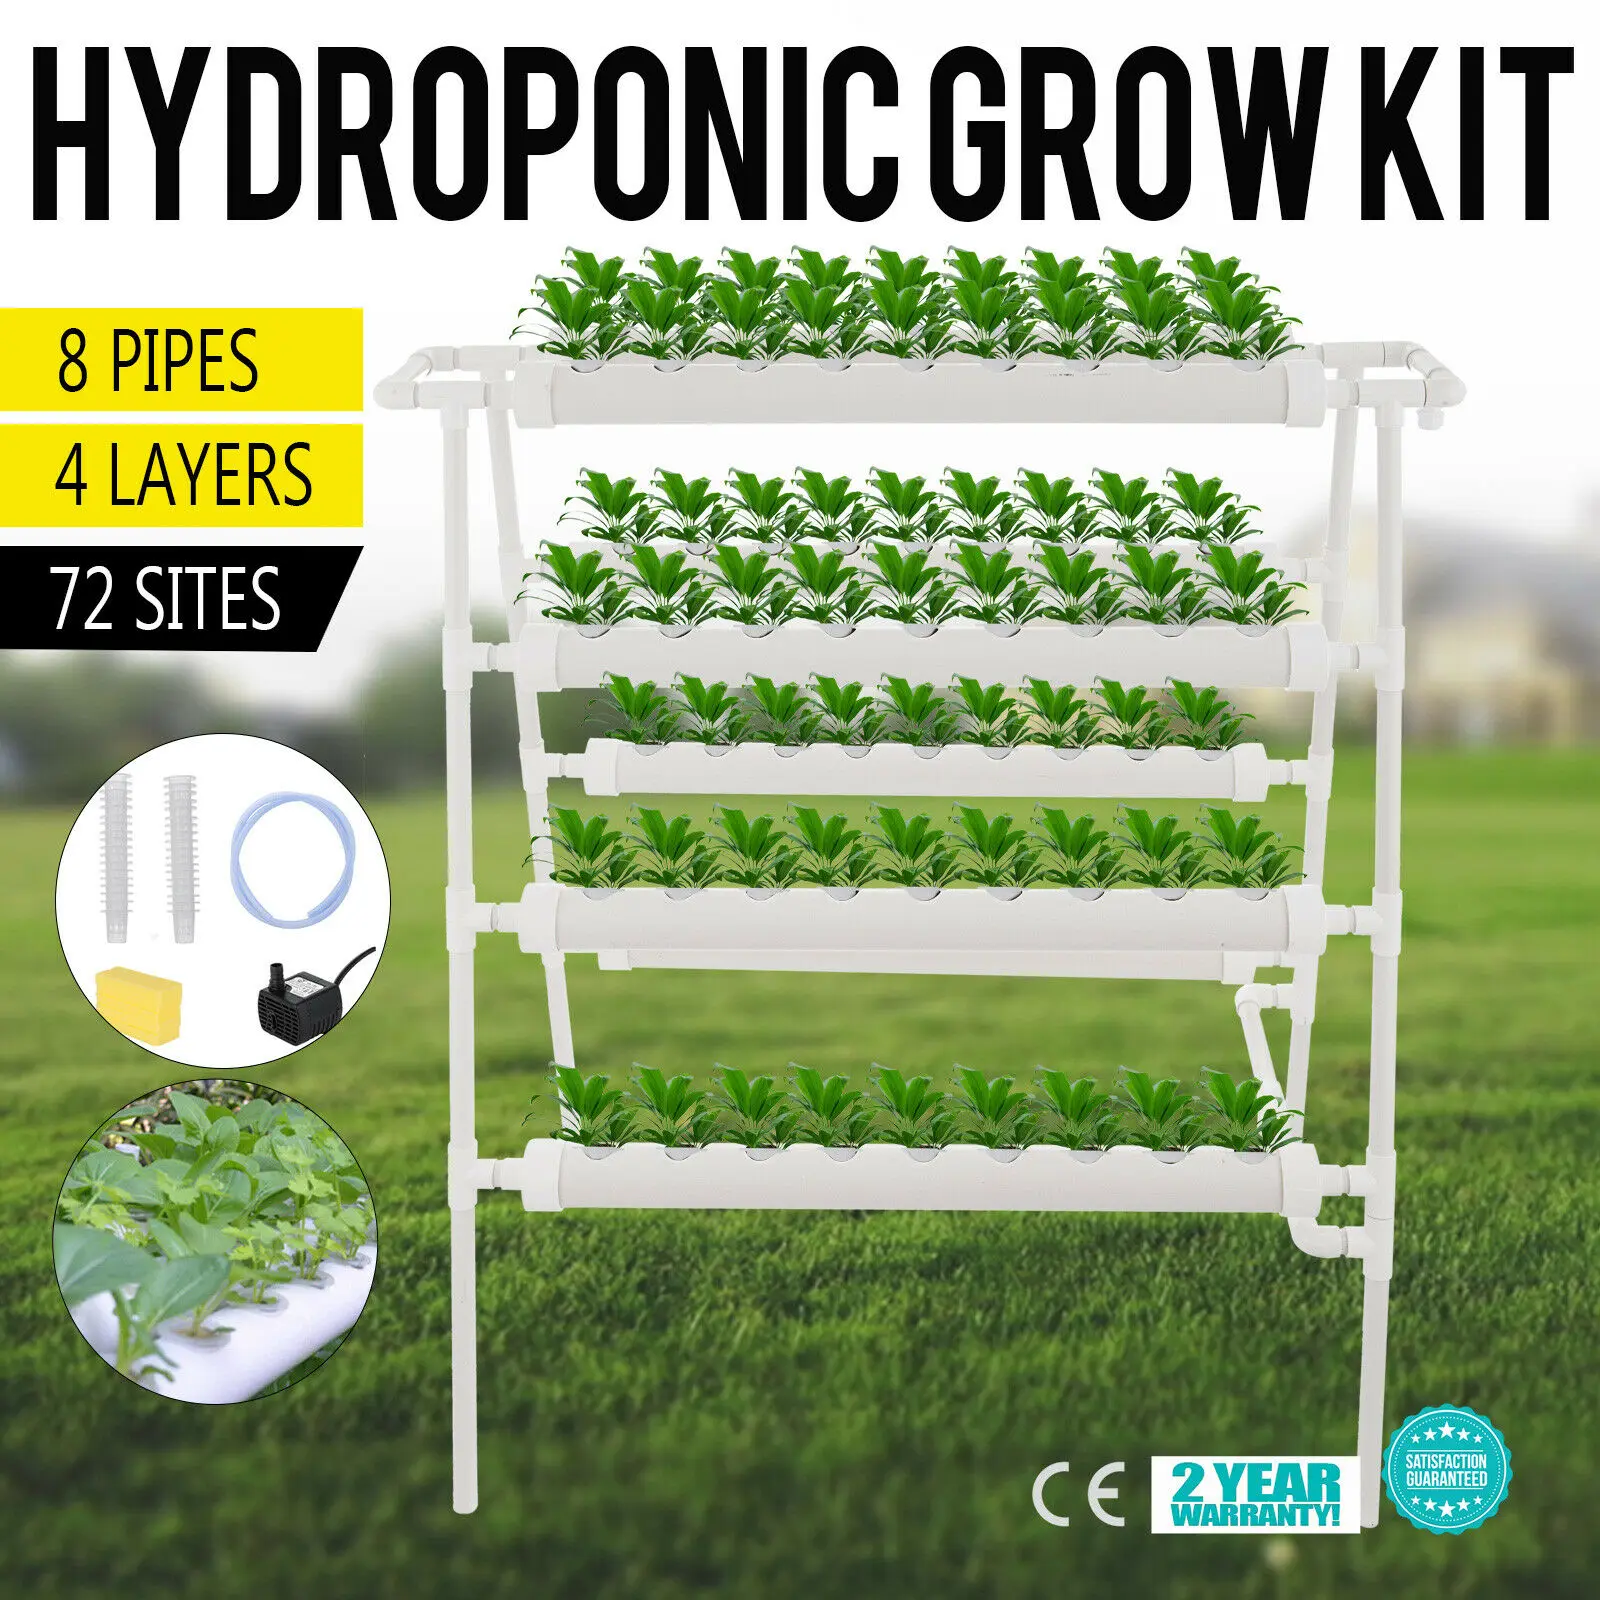 6 Sites Hydroponic Site Grow Kit Box-type Culture Garden Growing System 